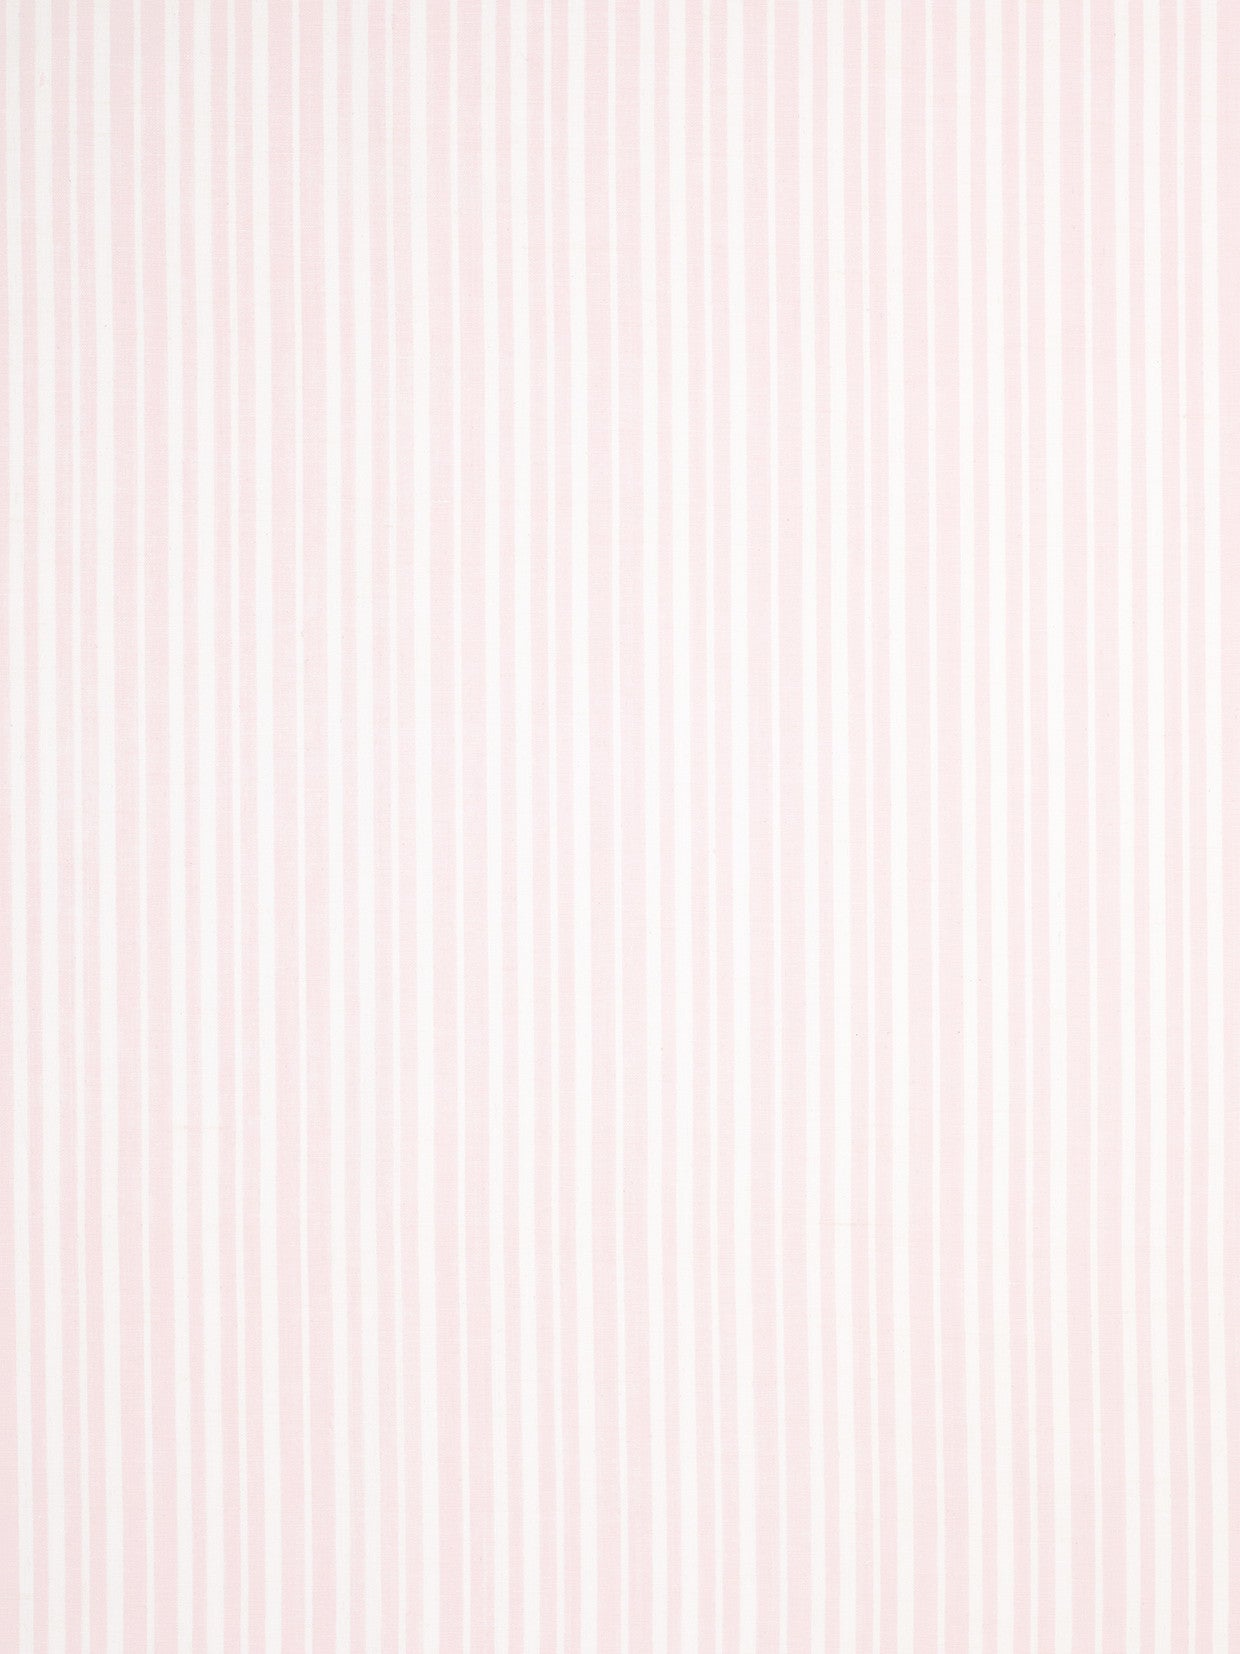 Palermo Ticking Stripe Cotton Linen Home Decor Fabric by the Meter or by the yard for curtains, blinds or upholstery in Light Tea Rose Pink ships from Canada (USA)